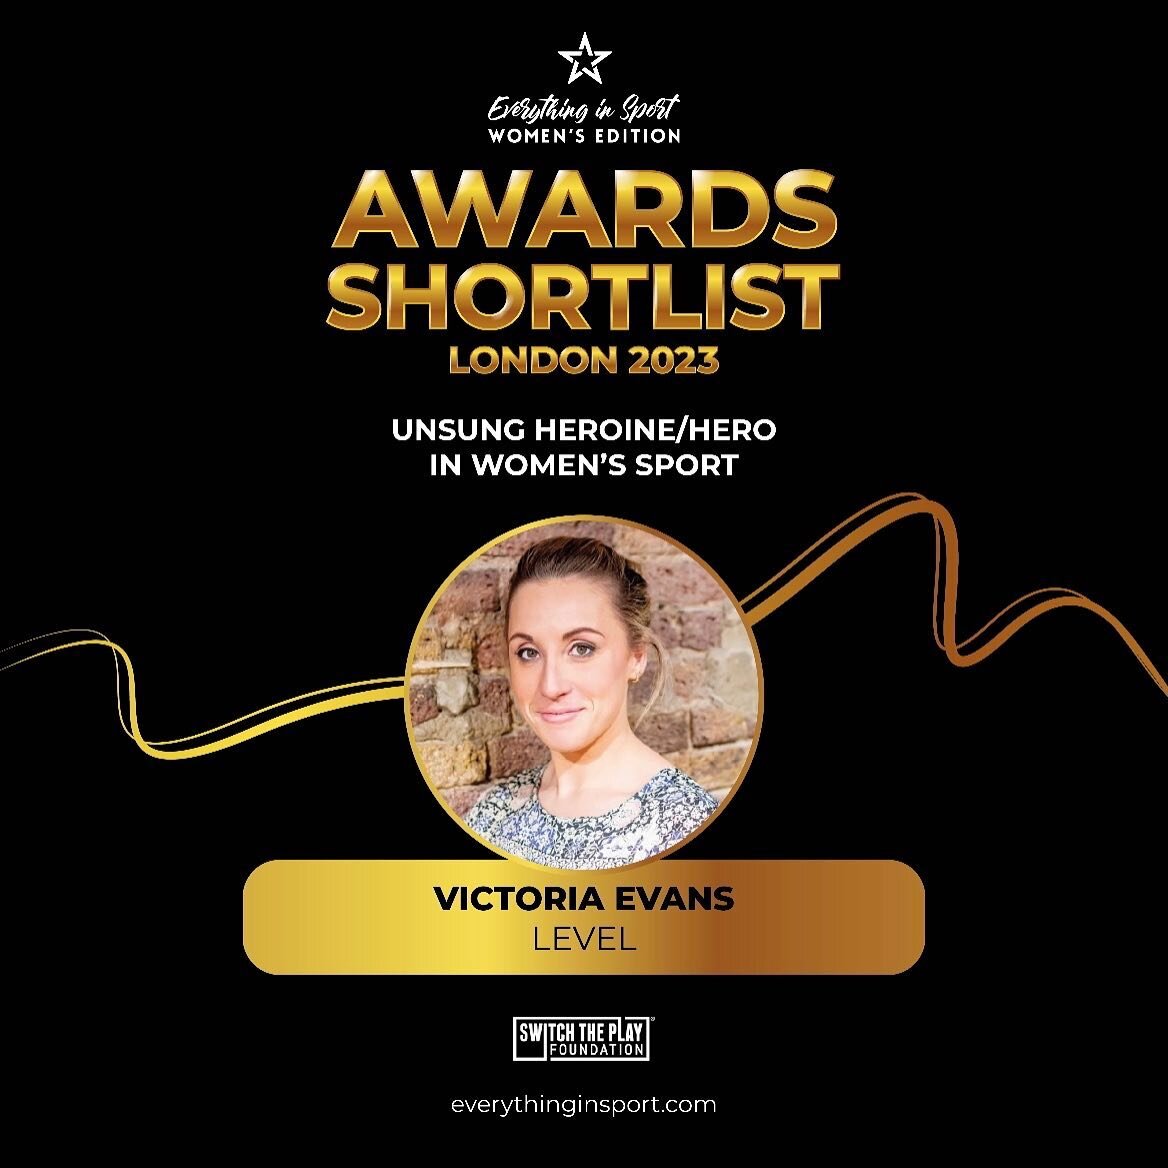 Slightly surreal to learn that I have been shortlisted alongside two other candidates for the&nbsp;&quot;Unsung Heroine/Hero in Women's Sport Award&quot;&nbsp;for the Everything in Sport, Women's Edition Awards taking place at Tottenham Hotspur Stadi